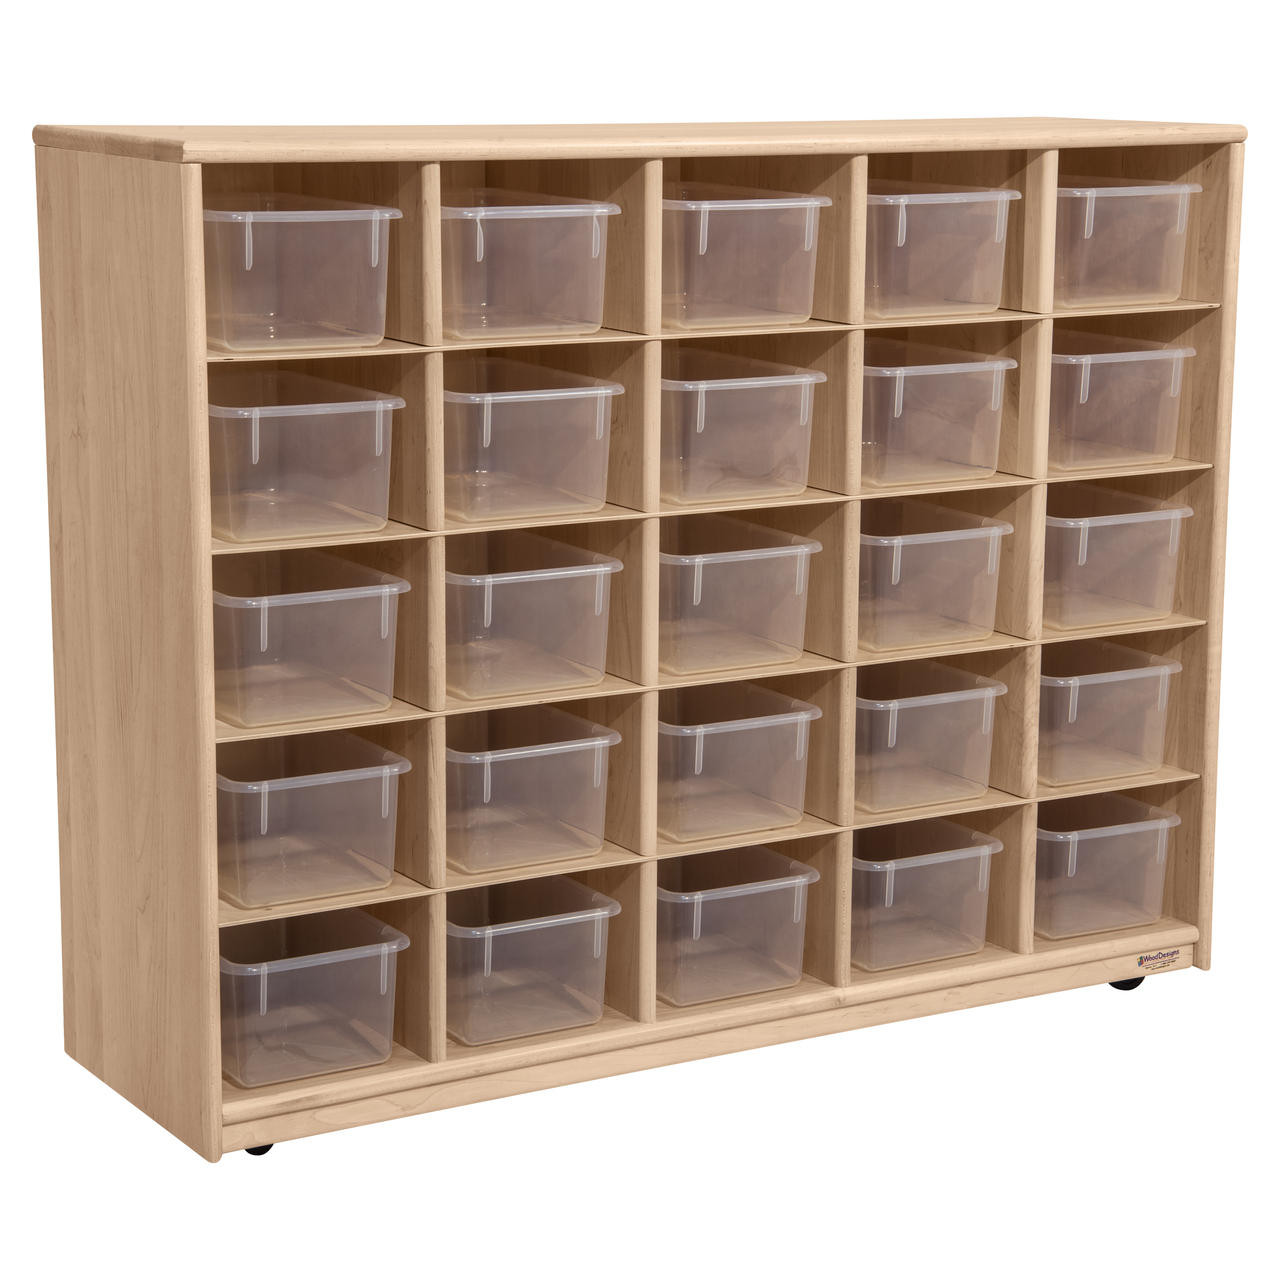 Wood Designs 25 Tray Storage with Translucent Trays